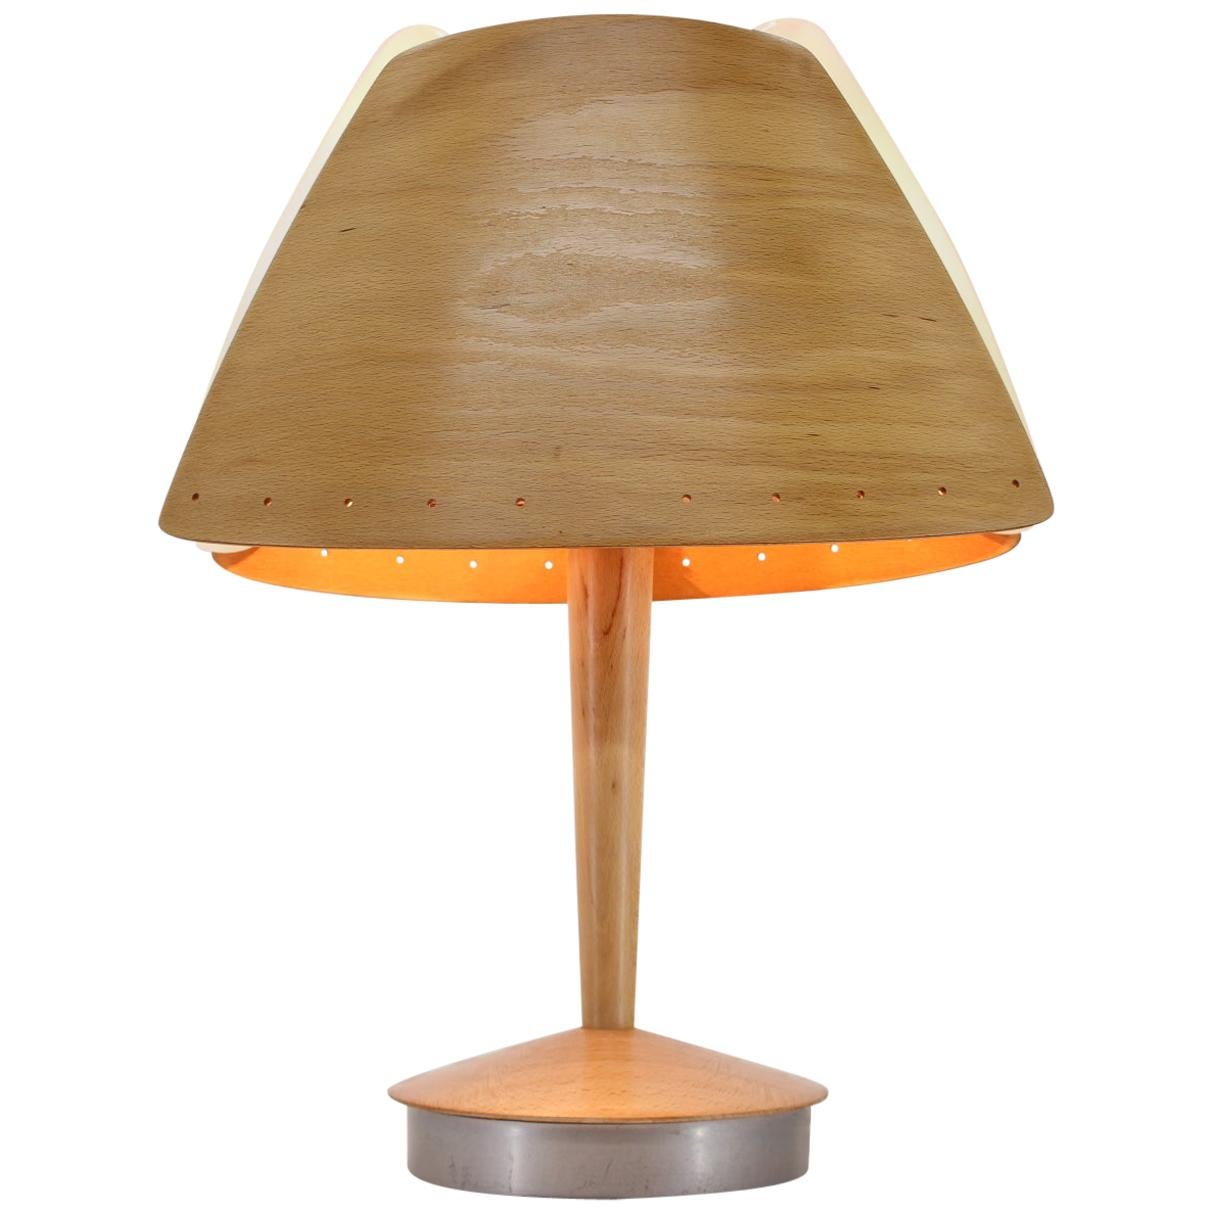 Midcentury French Design Wooden Table Lamp by Lucid, 1970s, Renovated